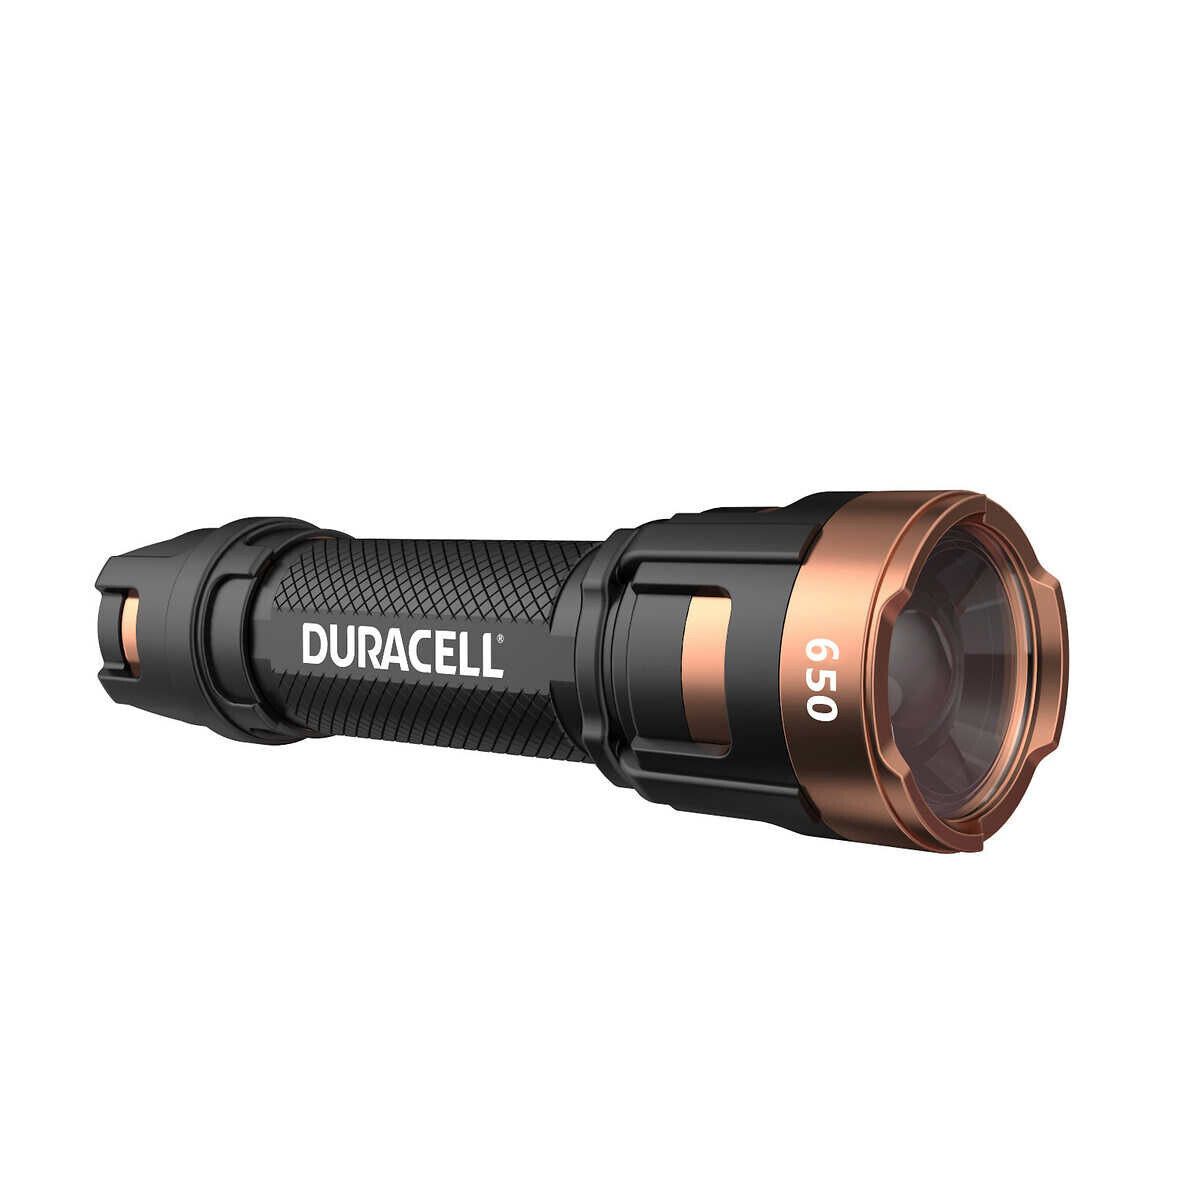 Torch LED Flashlight Duracell bright 650LM Aluminium DuraBeam Batteries Included